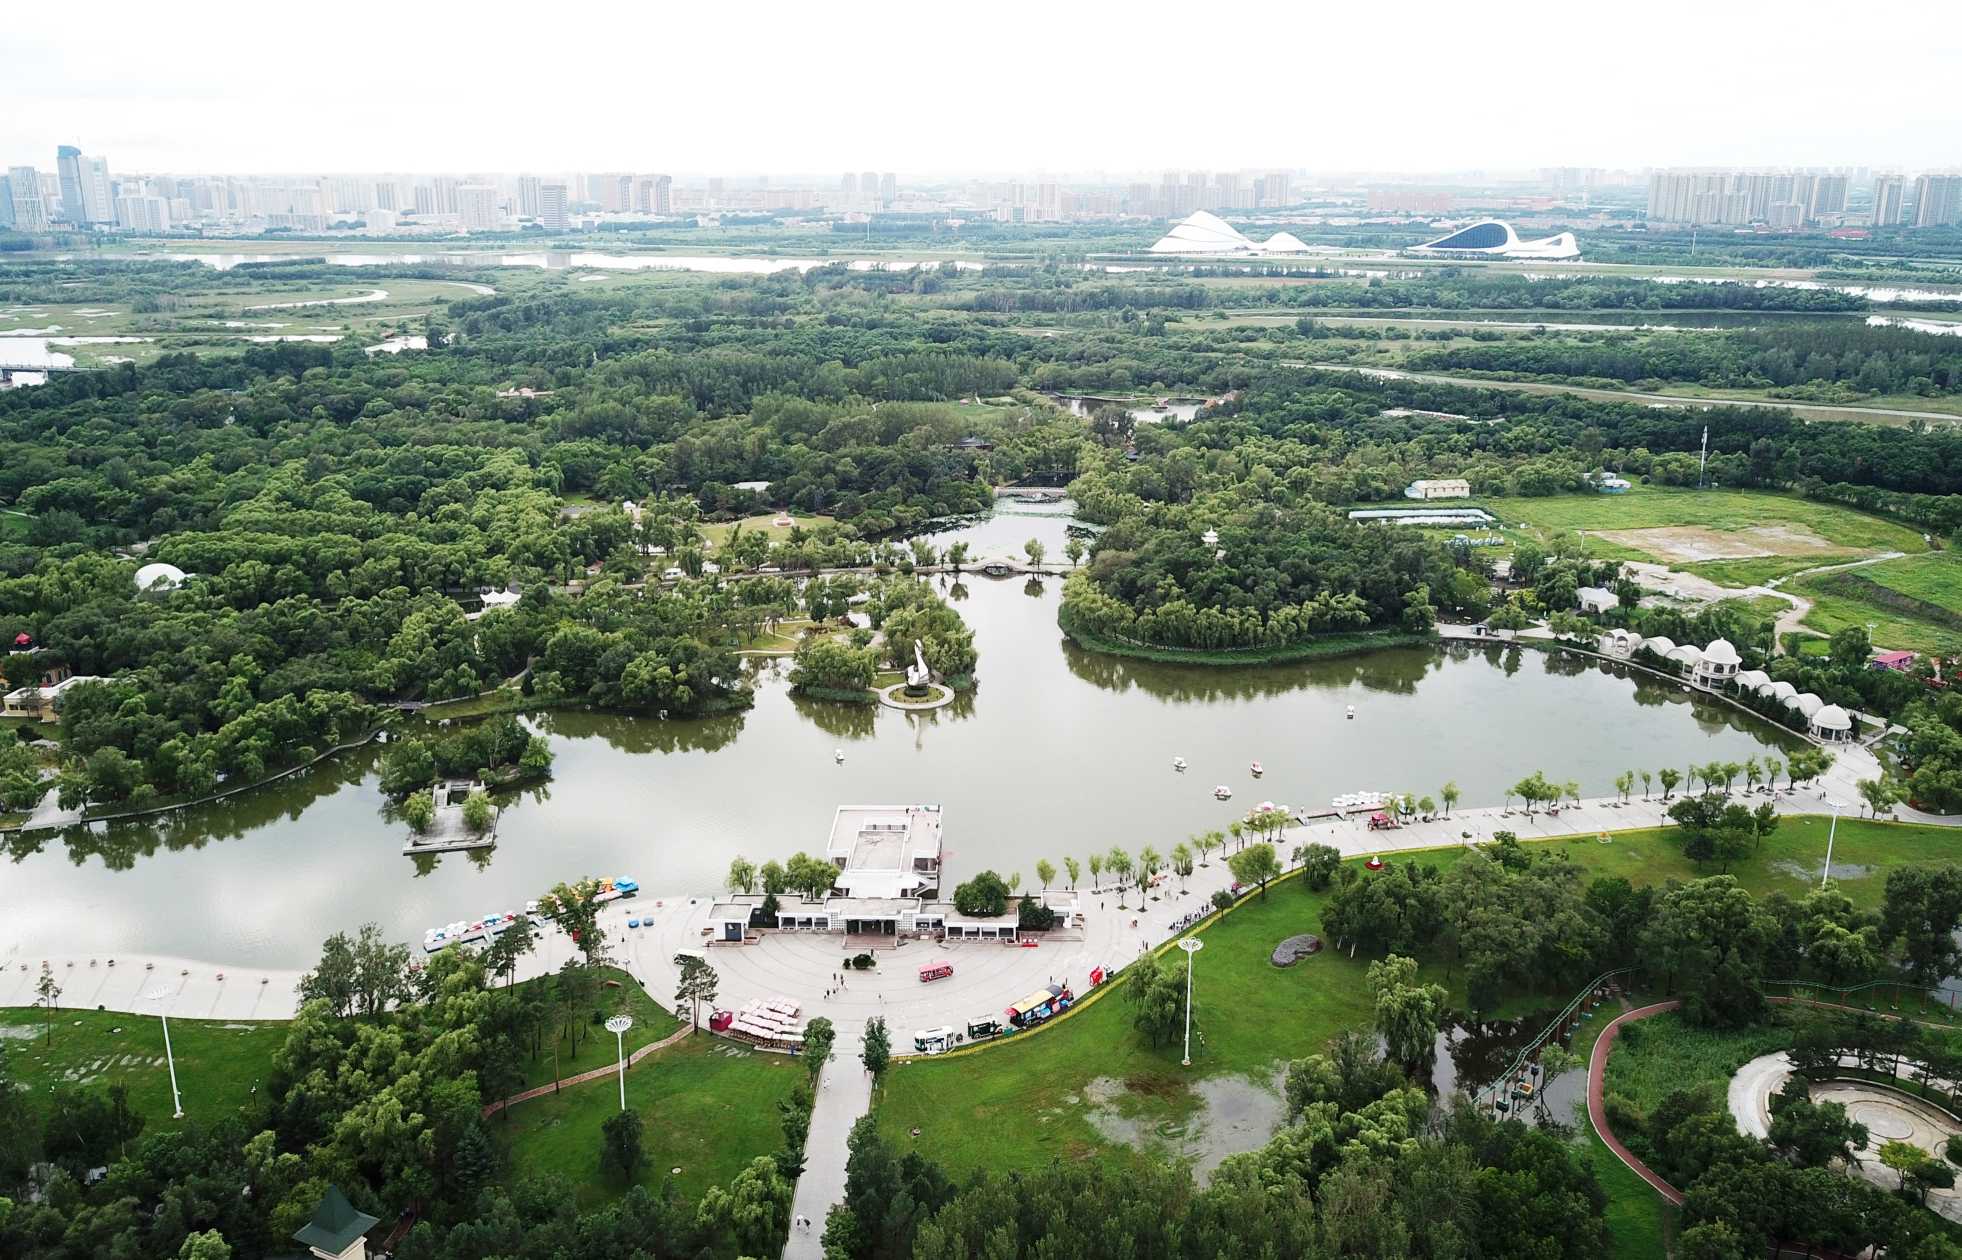 Heilongjiang builds a new growth pole for "summer economy"